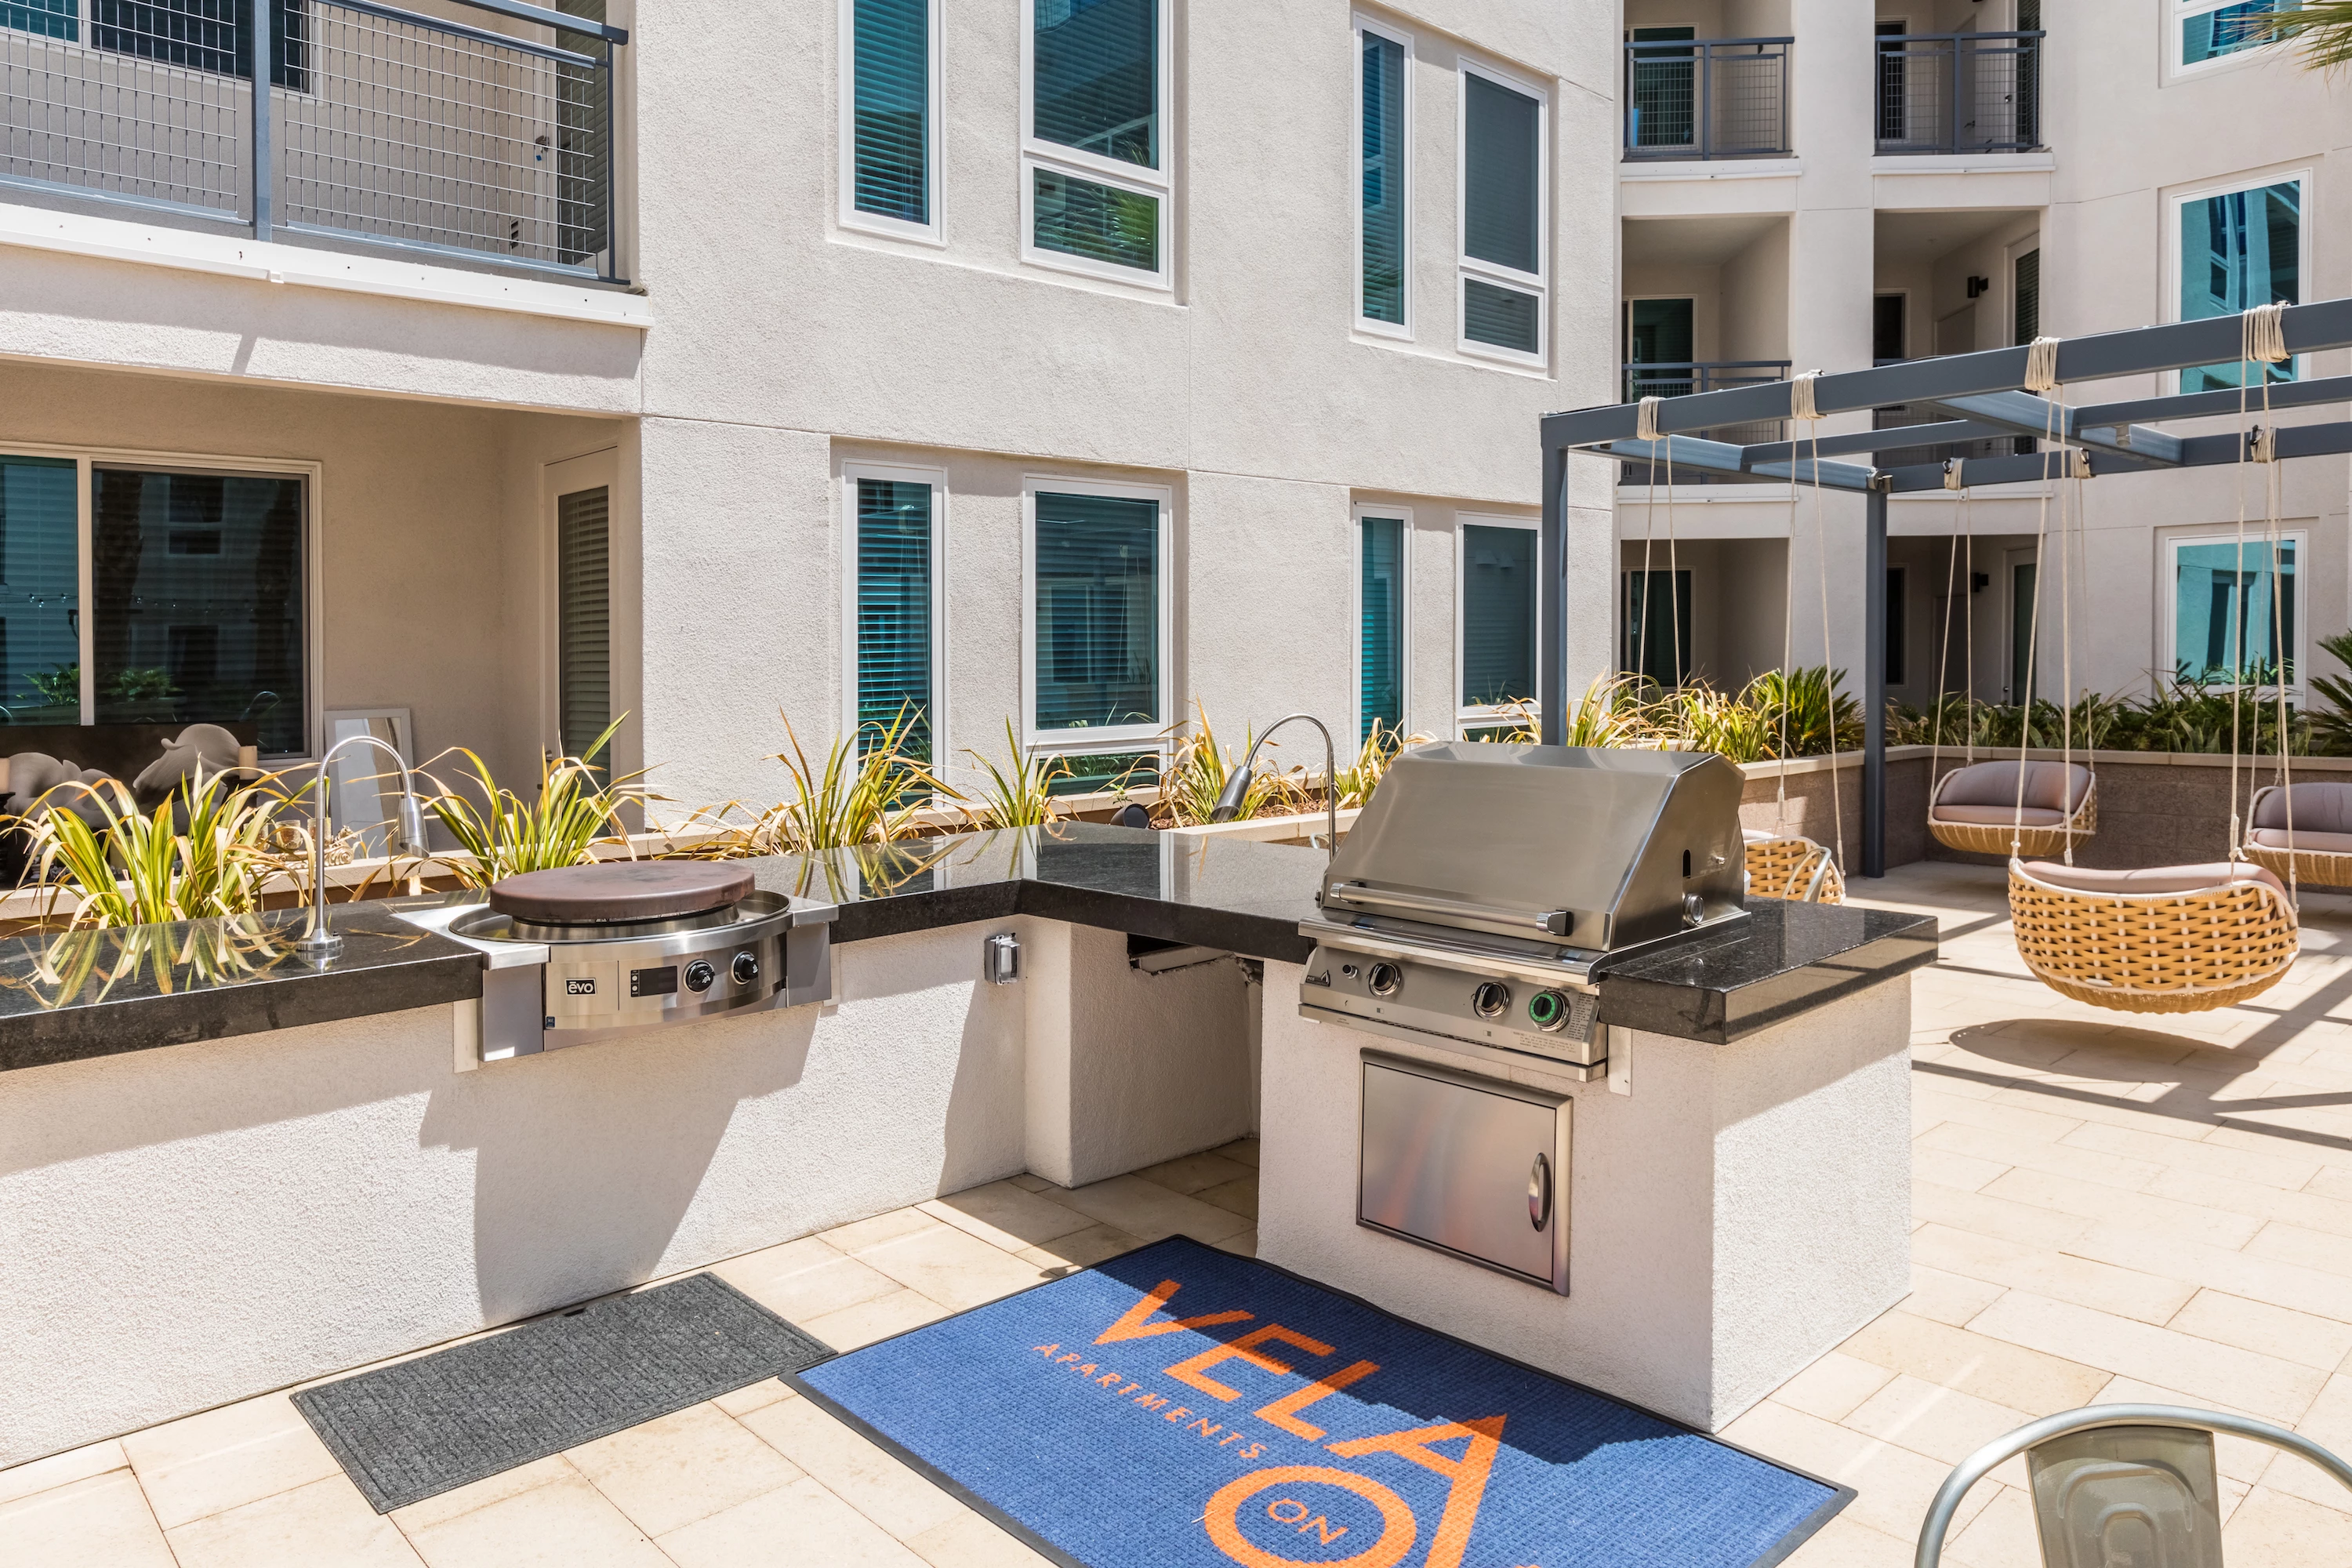 1241-12-exterior-courtyard-barbecue-and-evo-grill-at-vela-on-ox-apartments-in-woodlan.jpg